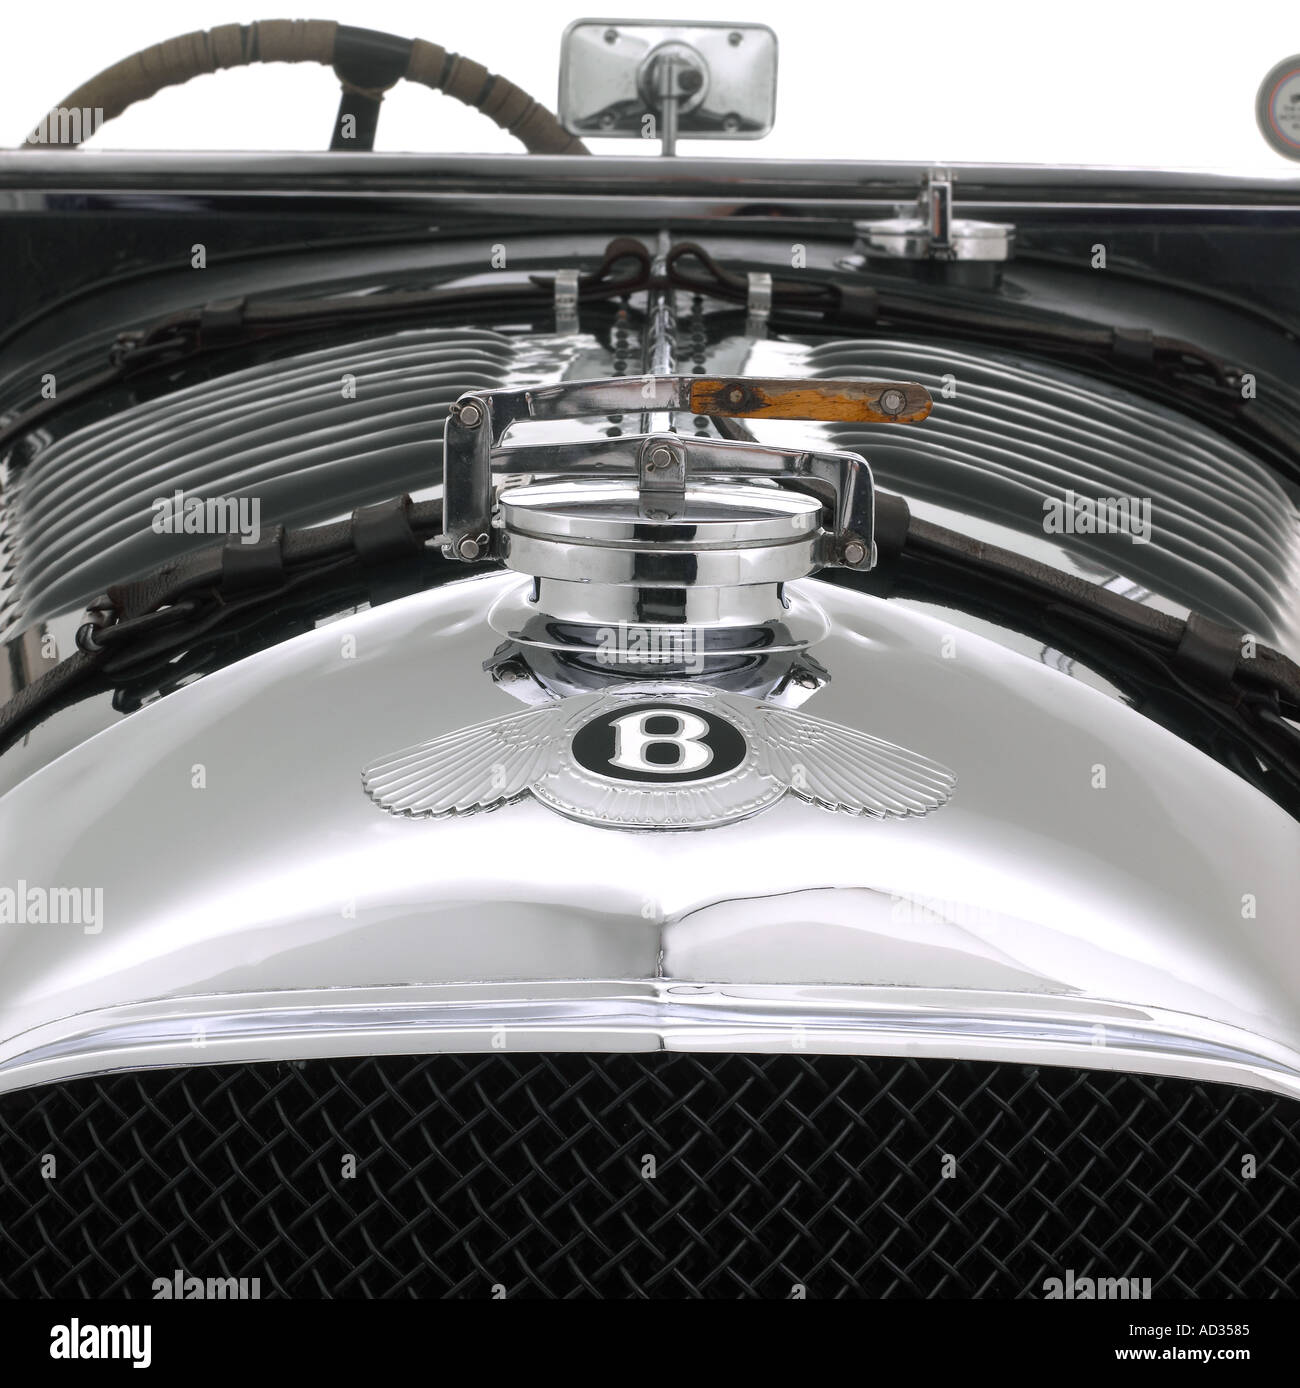 1930 Bentley 4.5 litre supercharged Stock Photo